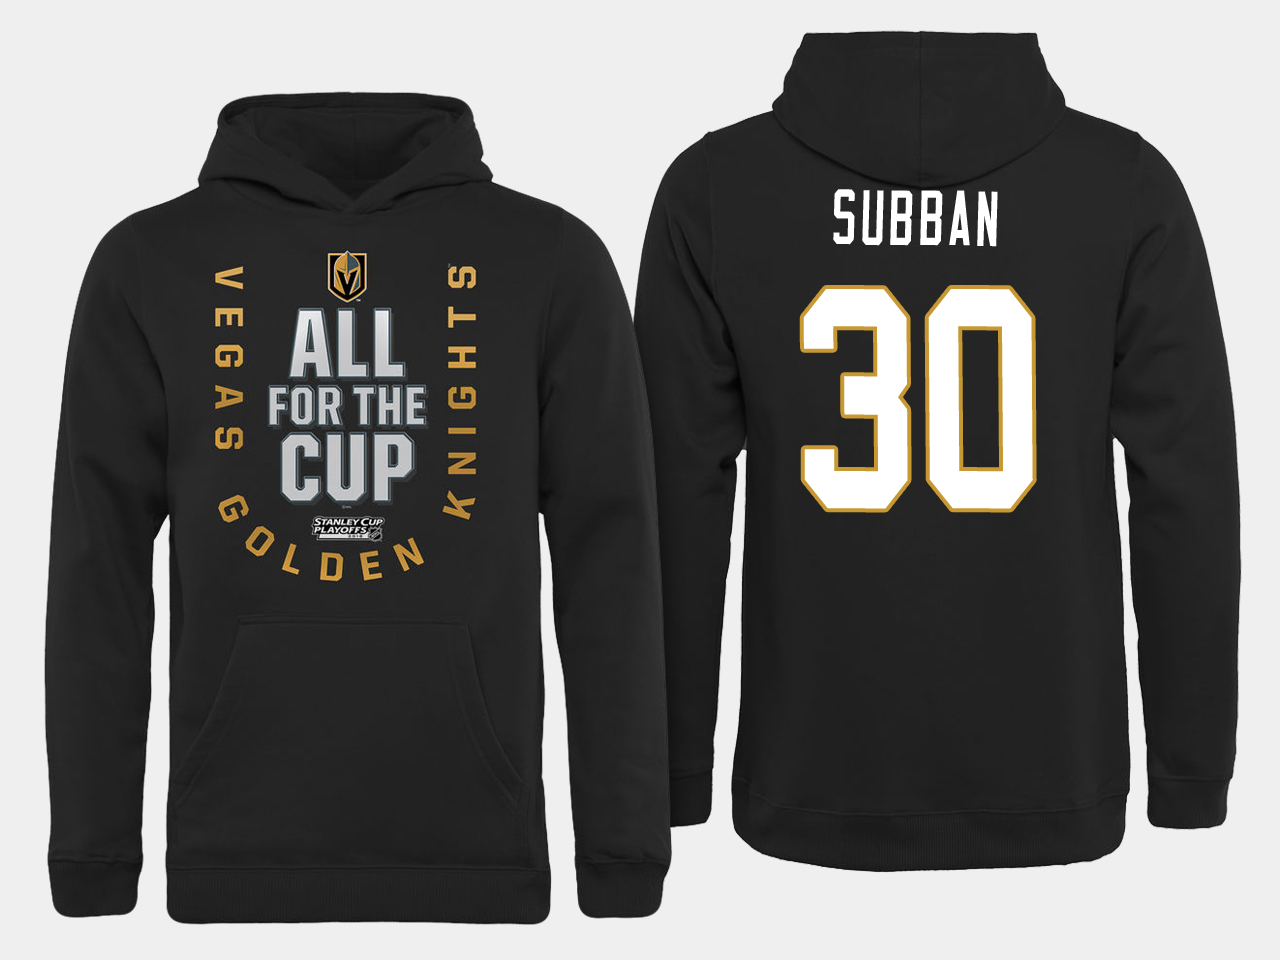 Men NHL Vegas Golden Knights #30 Subban All for the Cup hoodie->more nhl jerseys->NHL Jersey